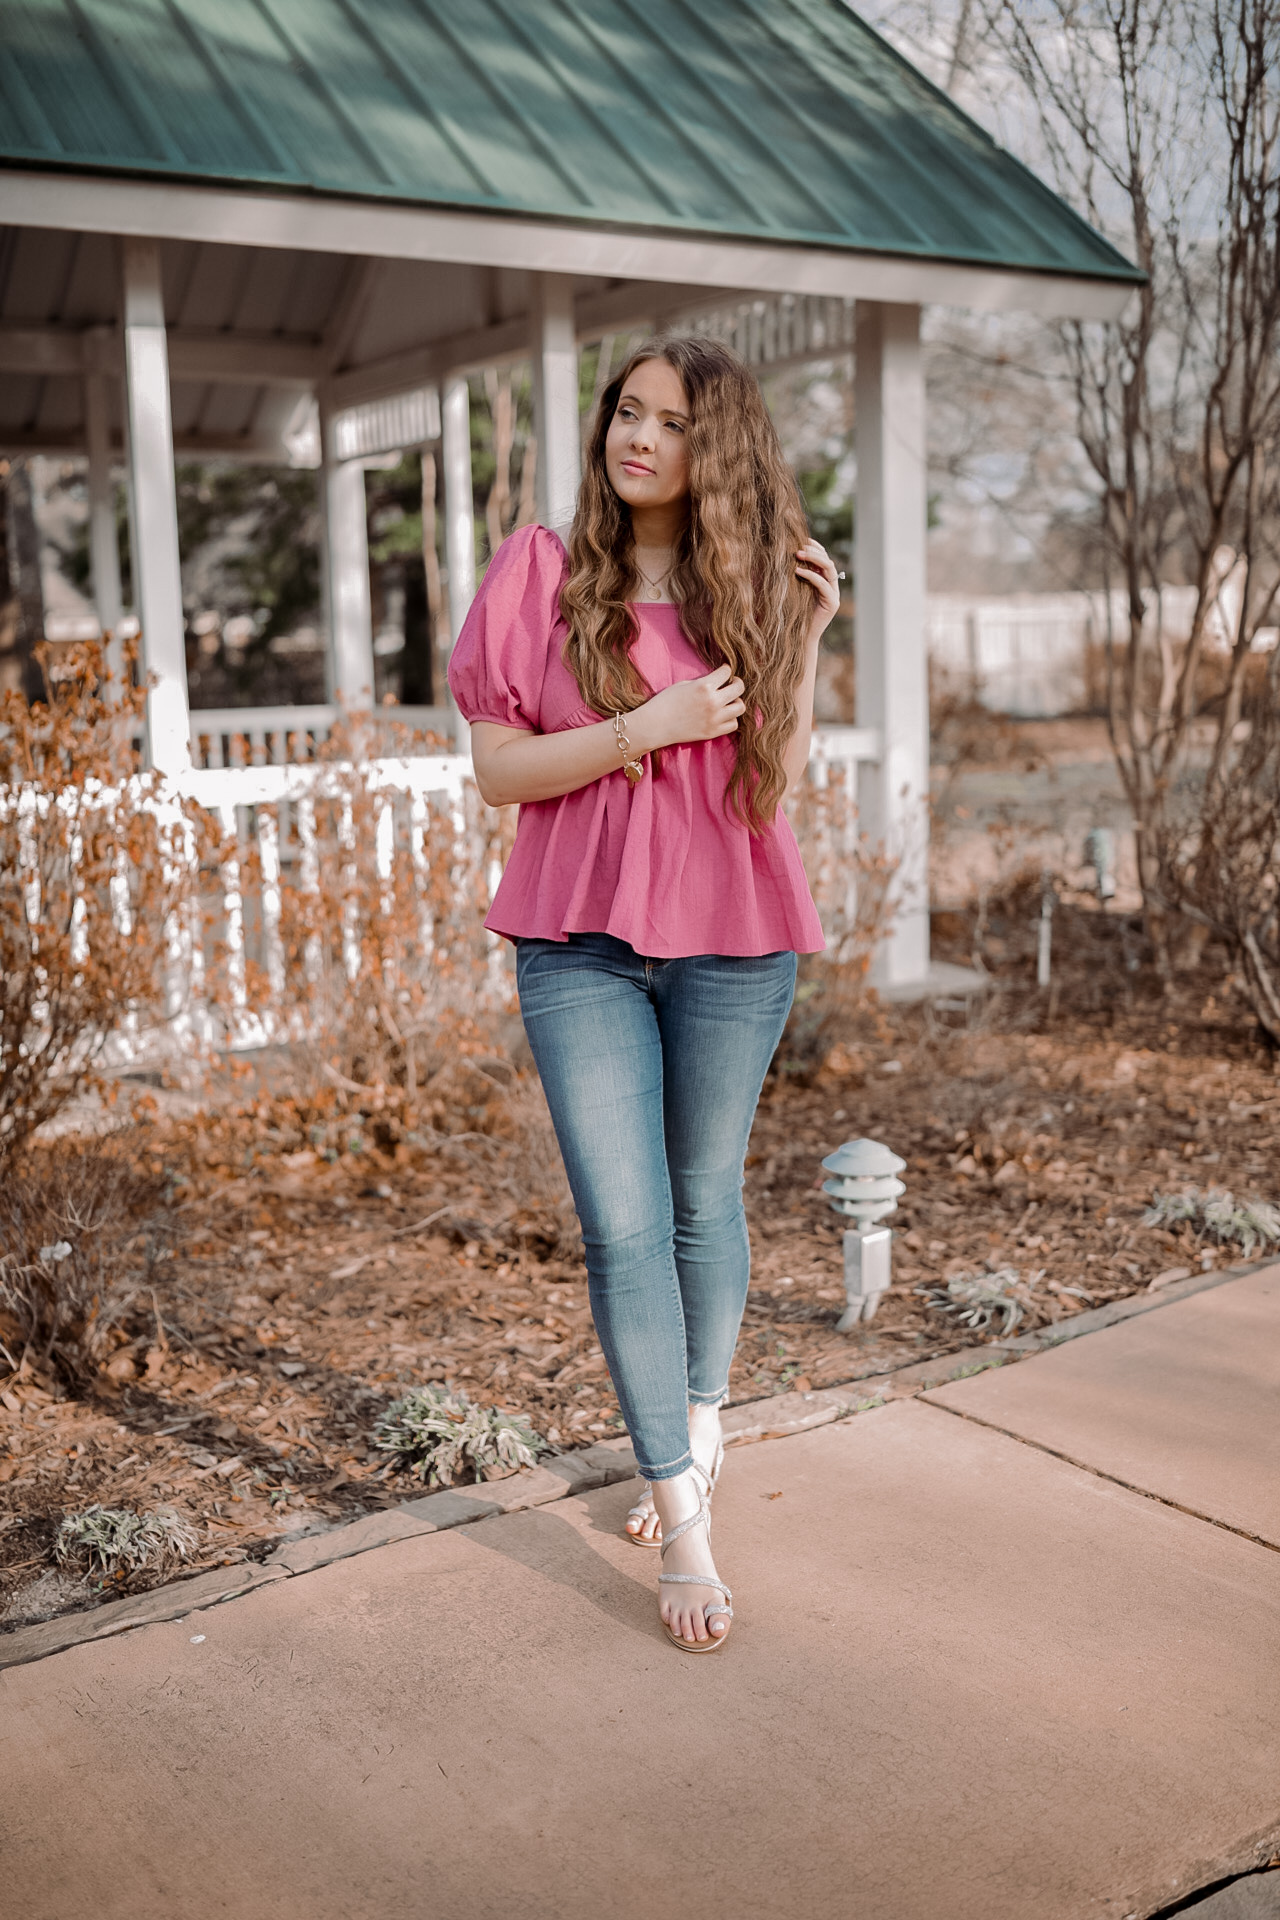 The $18 Pink Top You Need For Spring & Summer